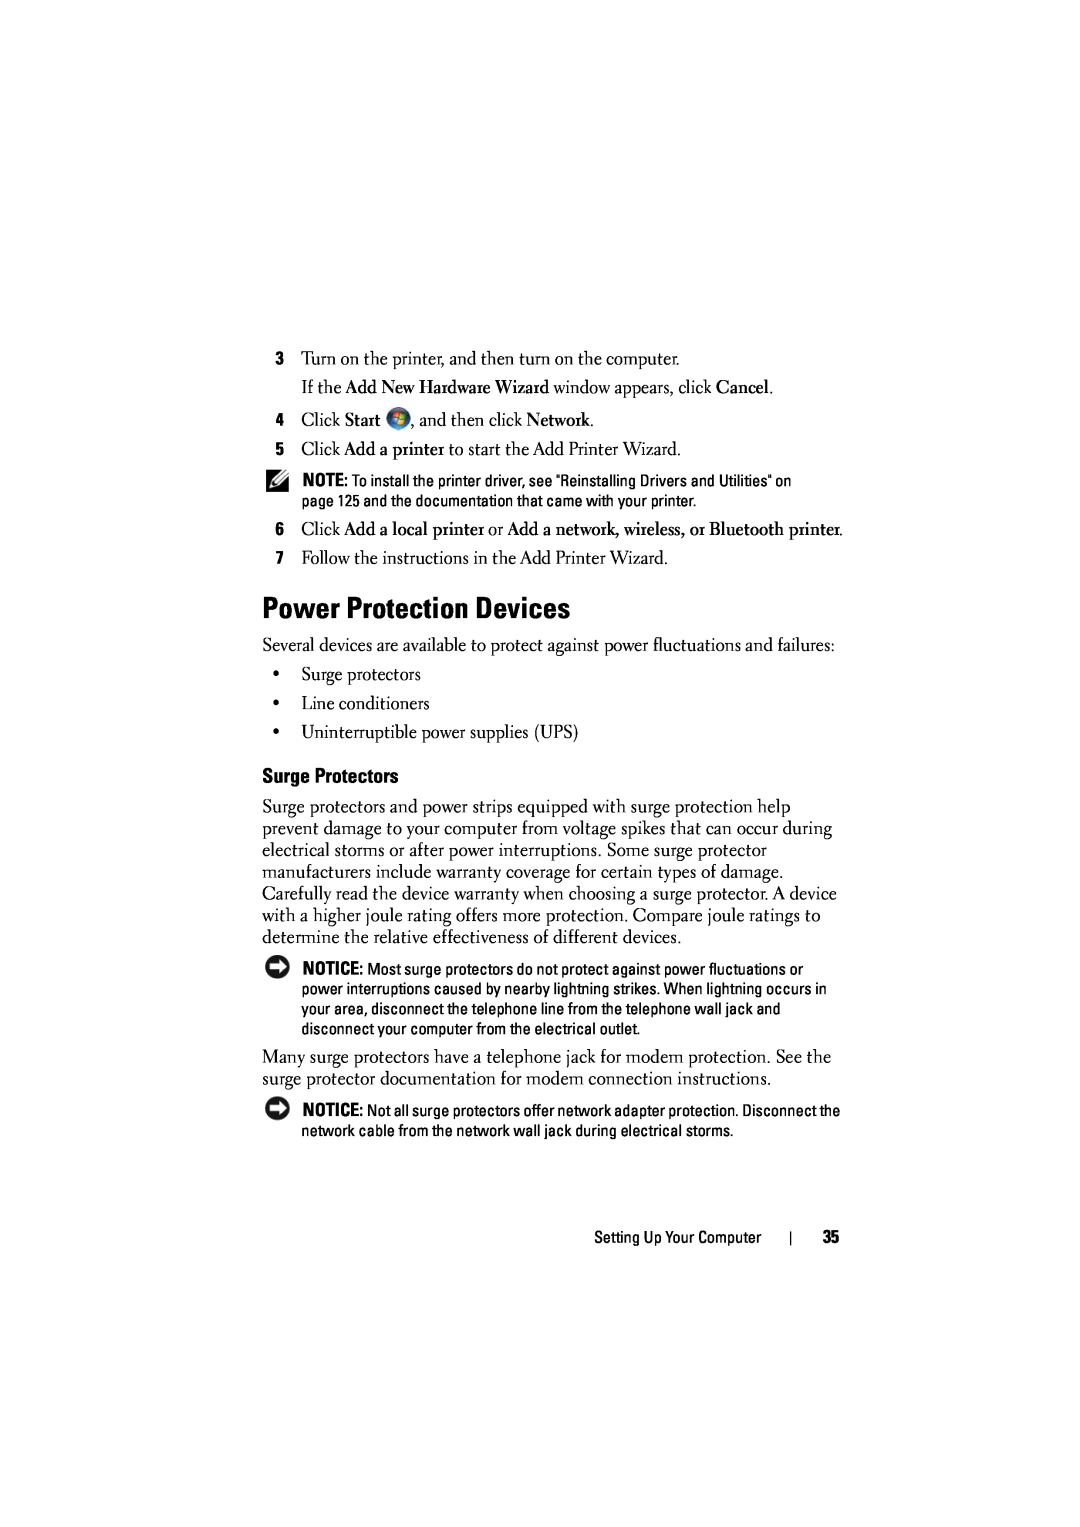 Dell 1526, 1525 owner manual Power Protection Devices, Surge Protectors 